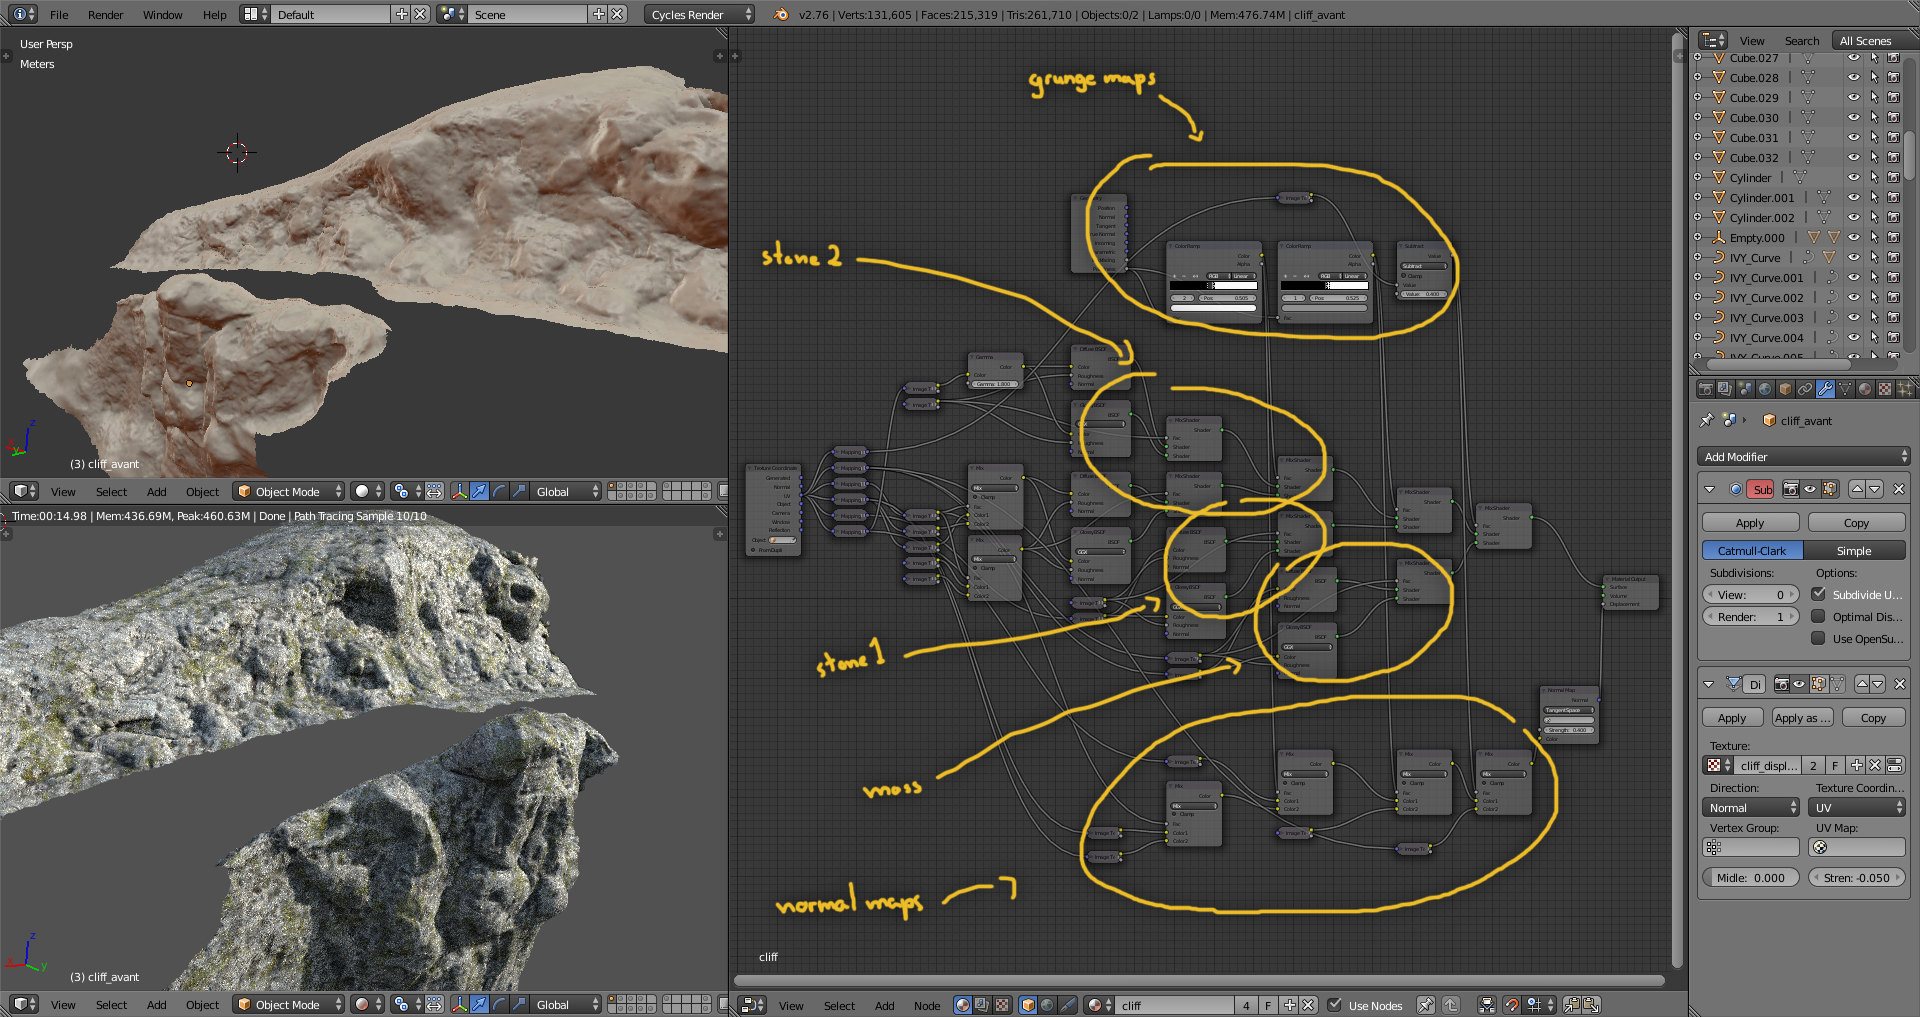 Then I separated the landscape mesh into smaller objects